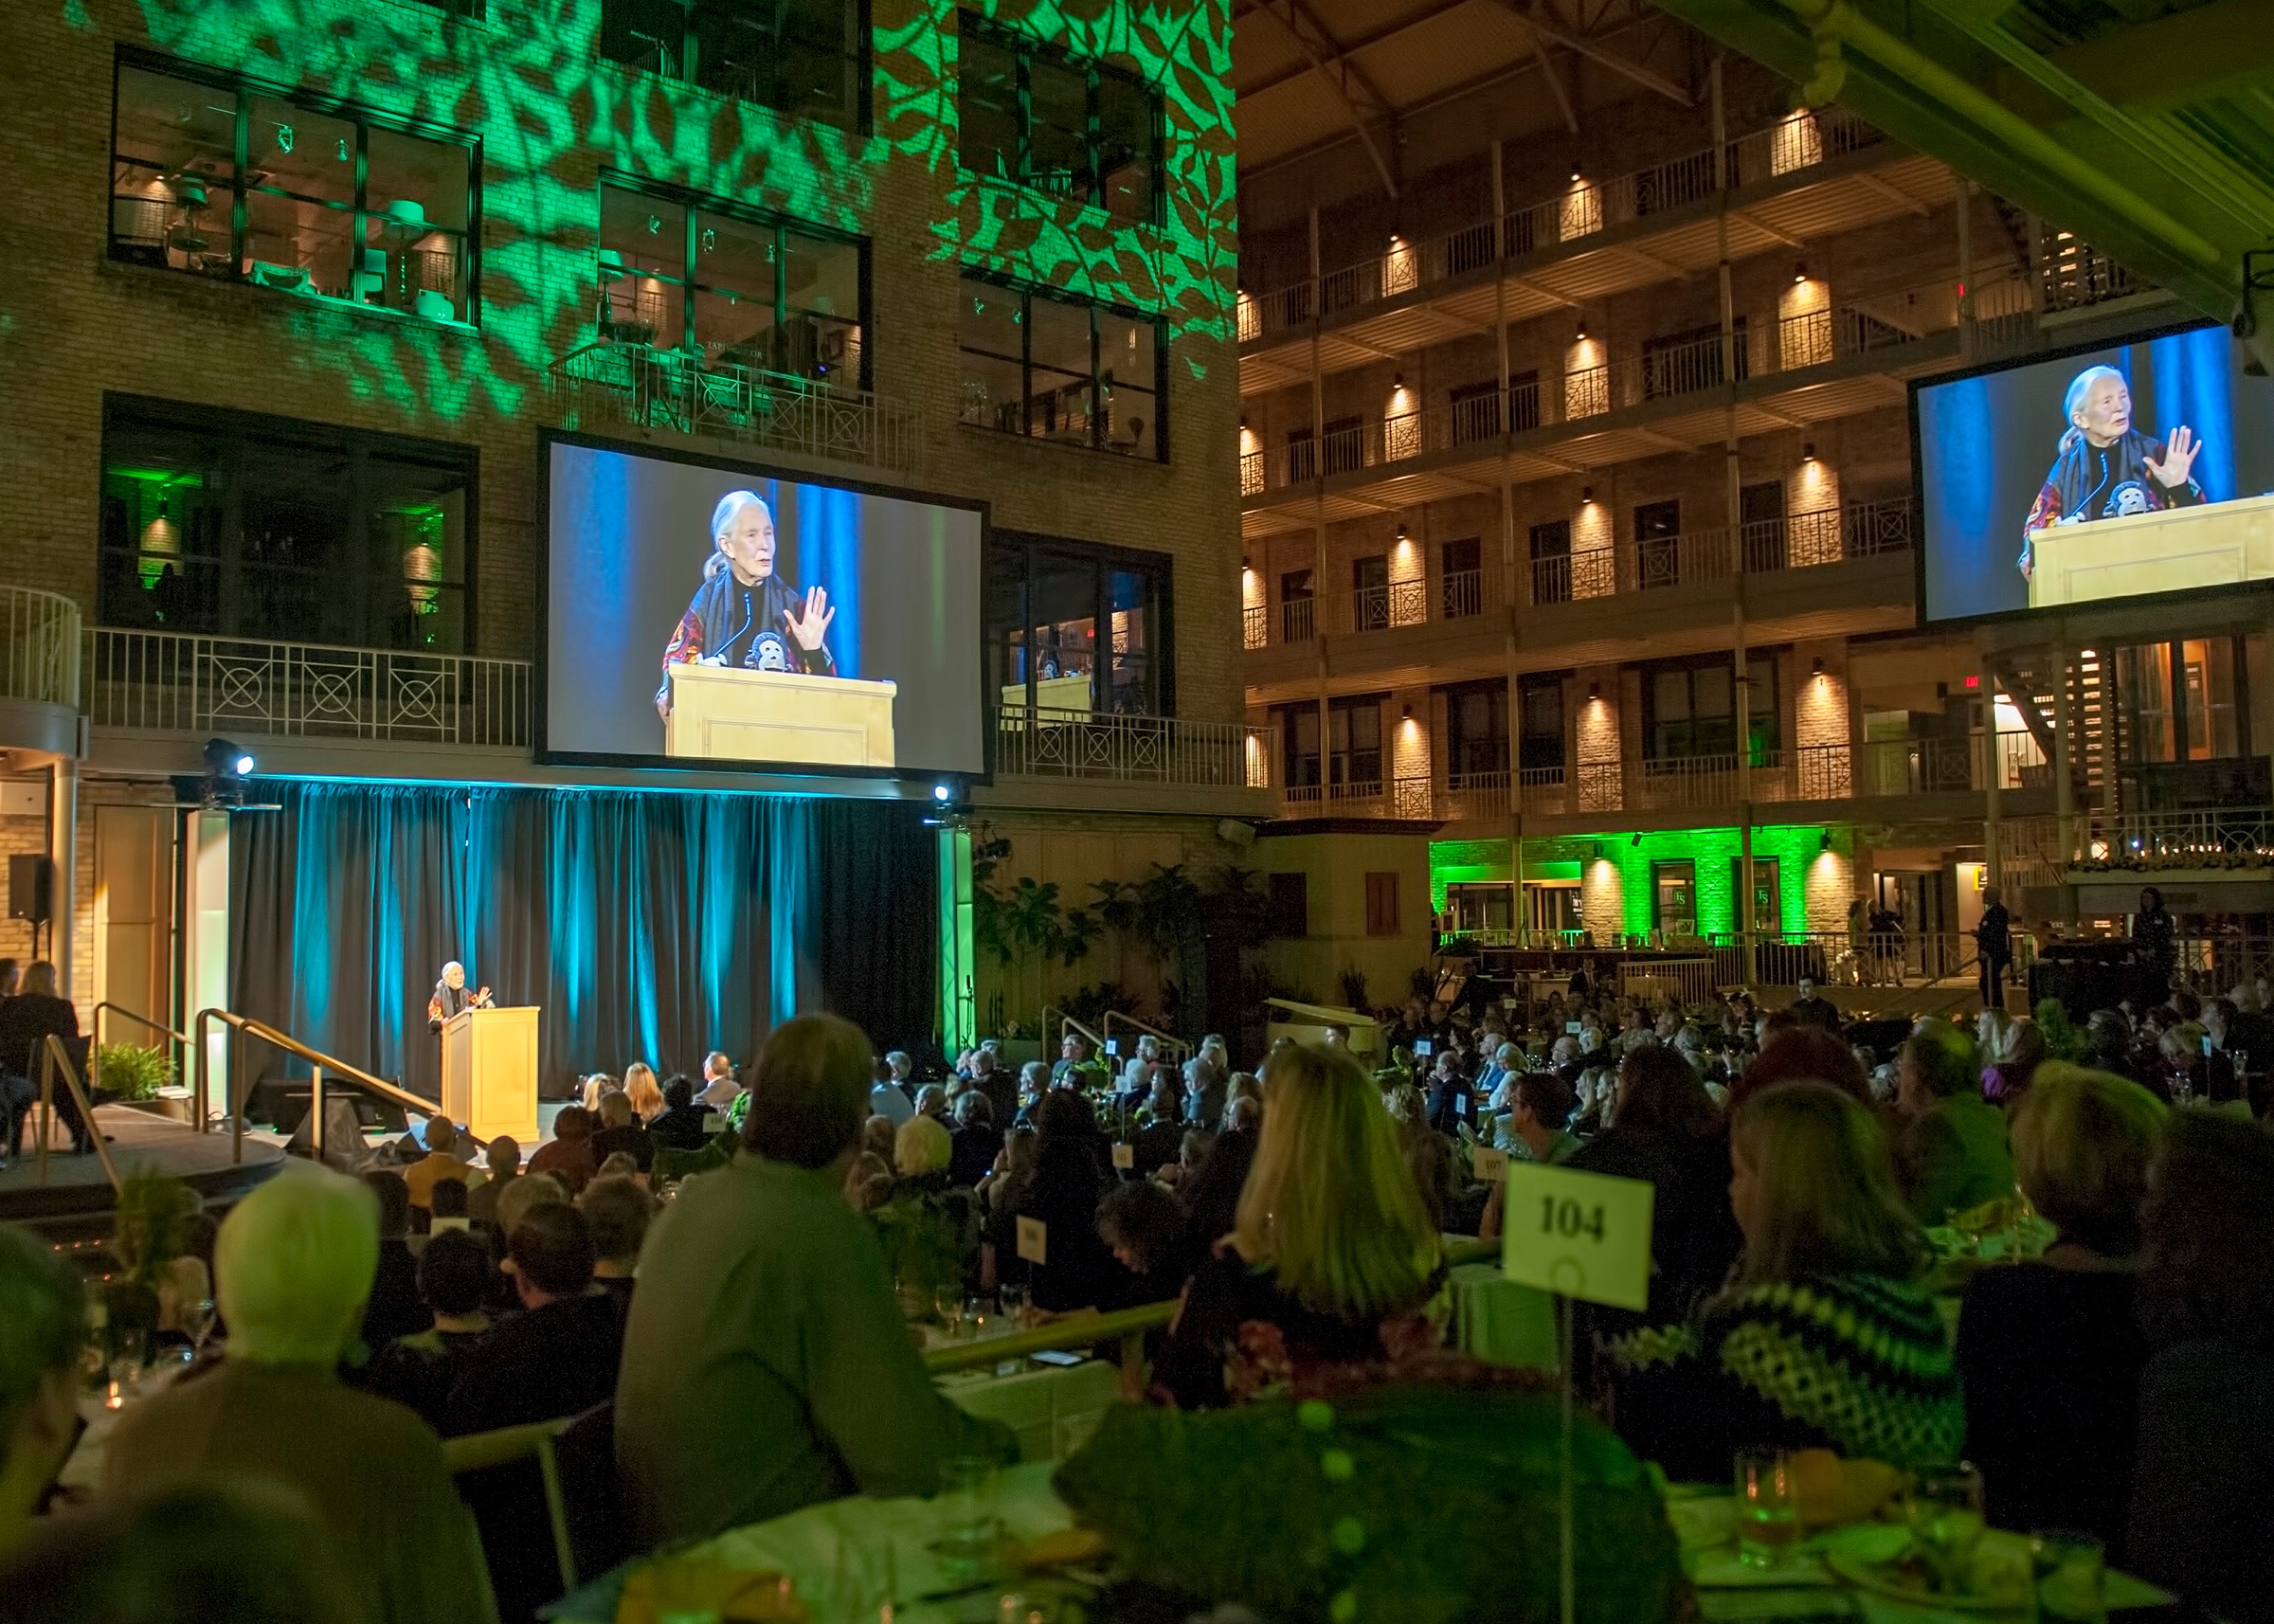 Ask the Pros: 7 Event Lighting and Sound Tips to Make Your Event Special